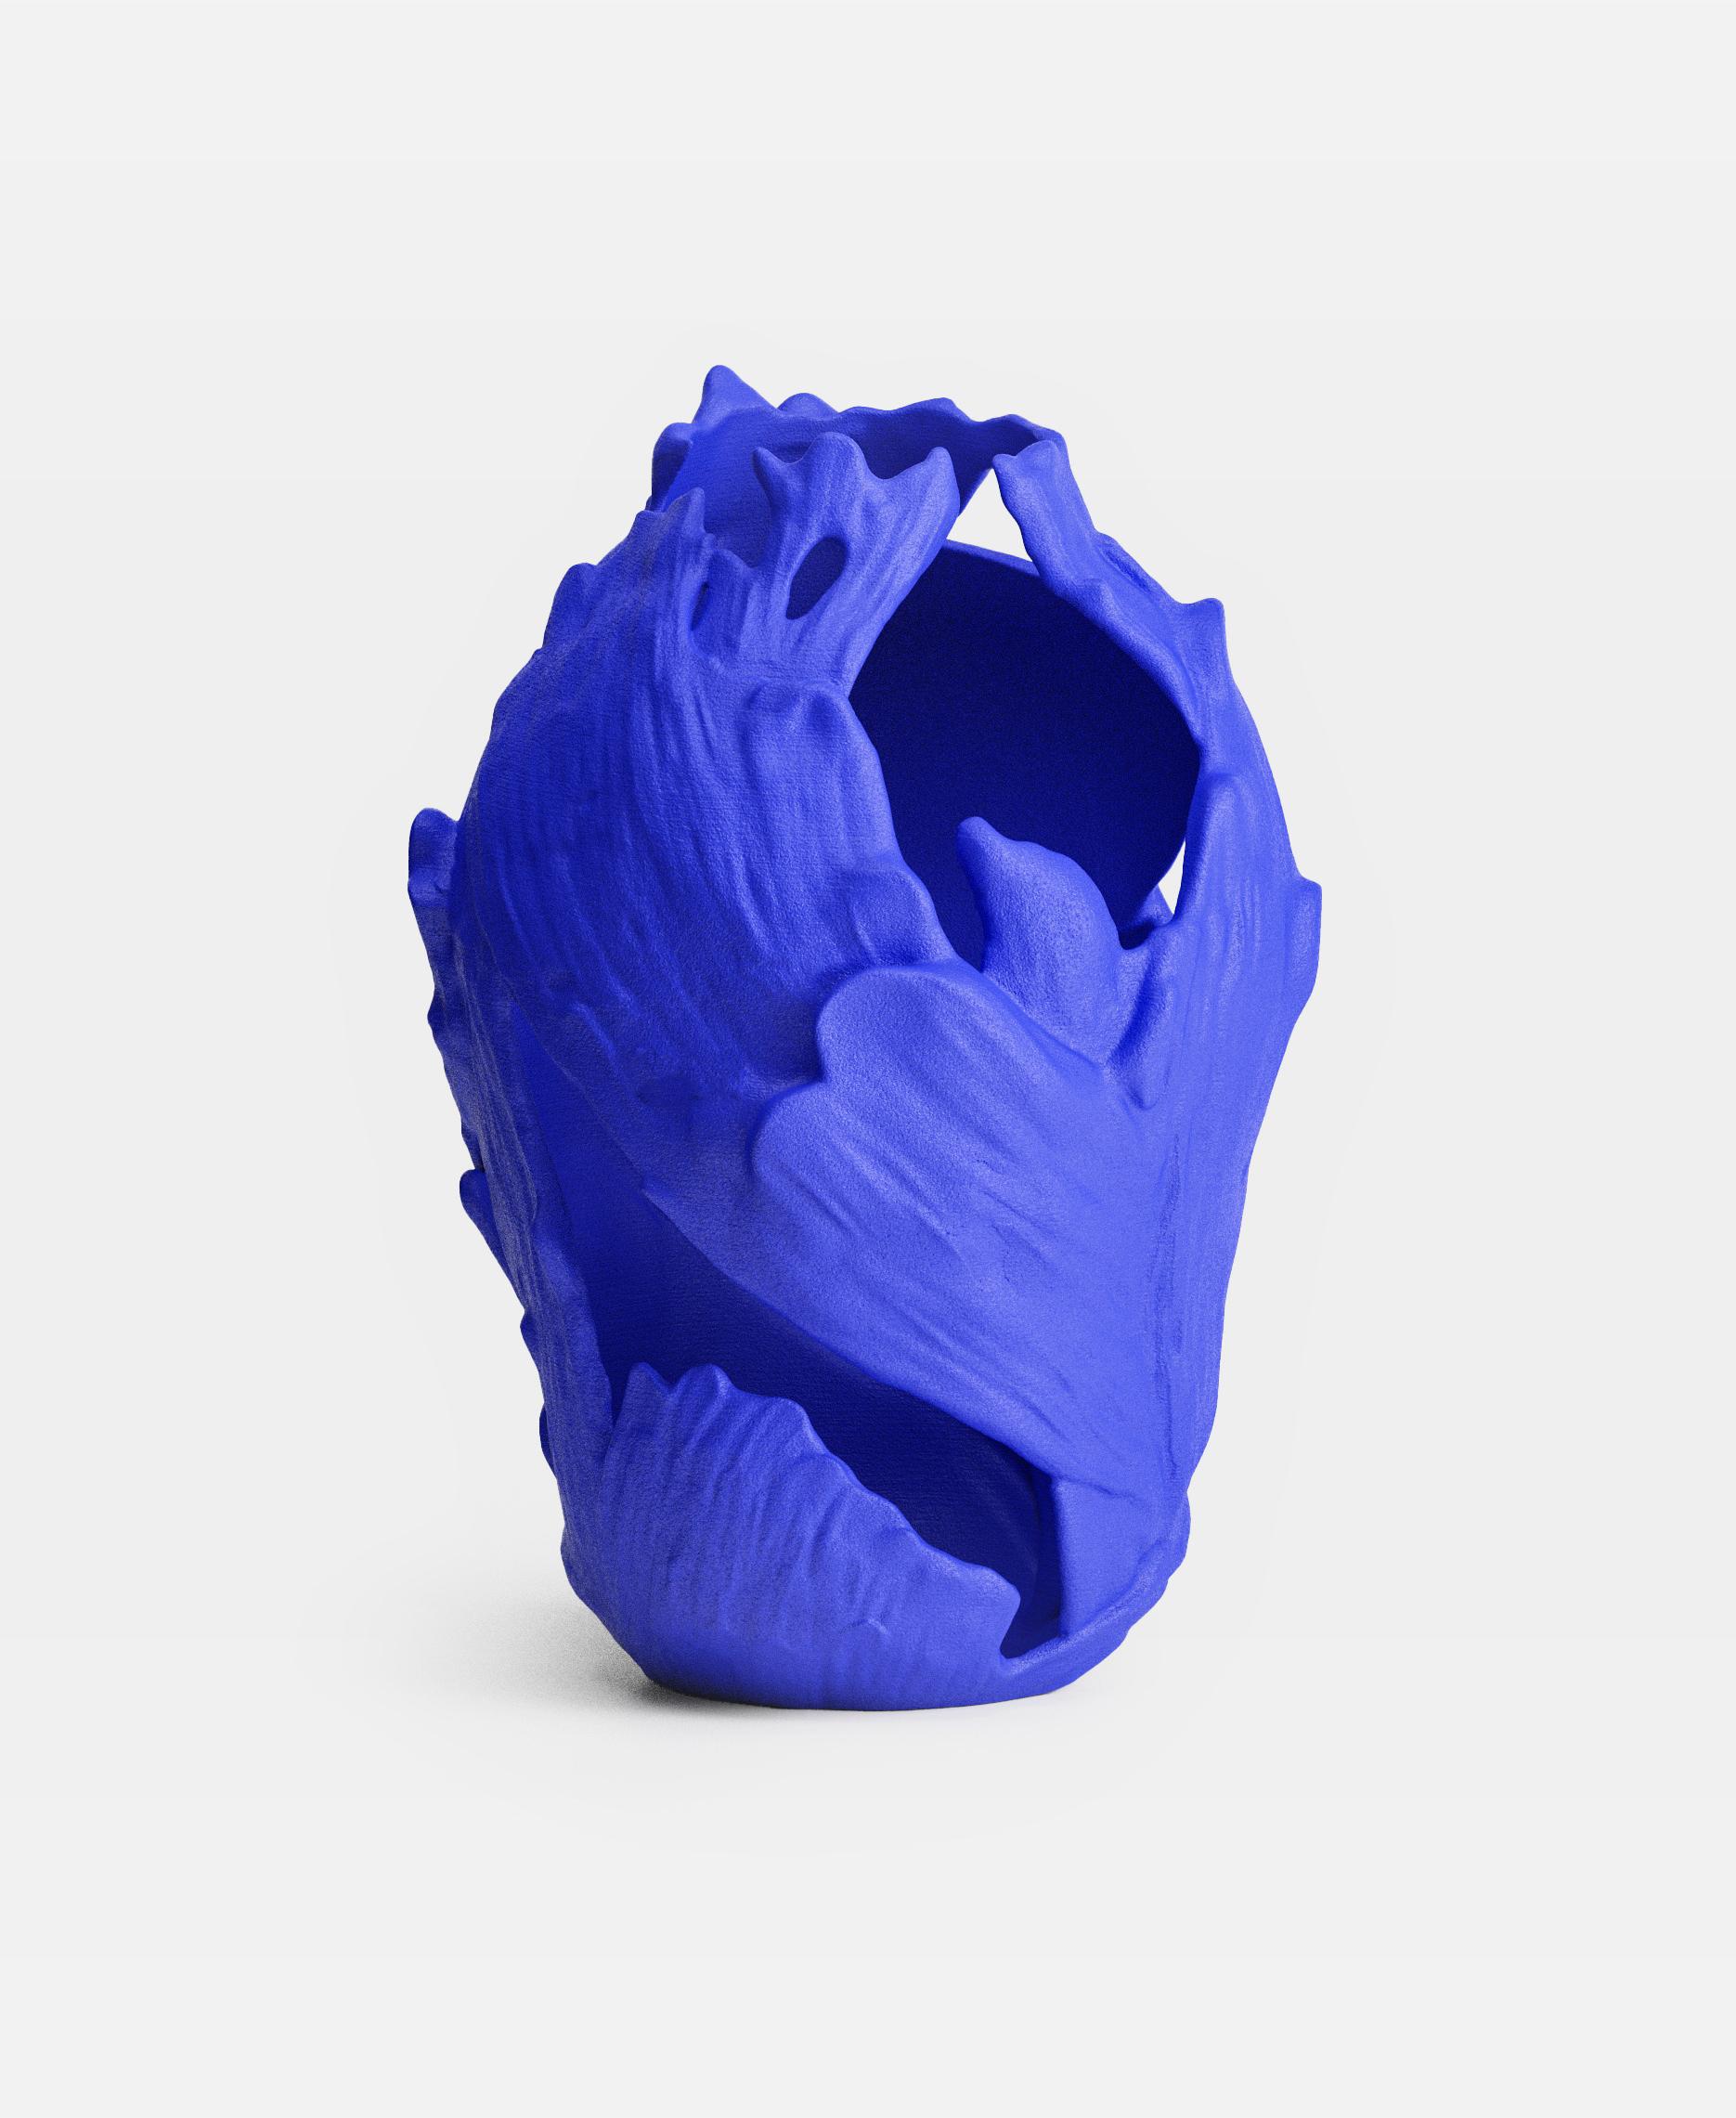 Poseidon Exclusive Vase | Embodied ideas collection 3d model